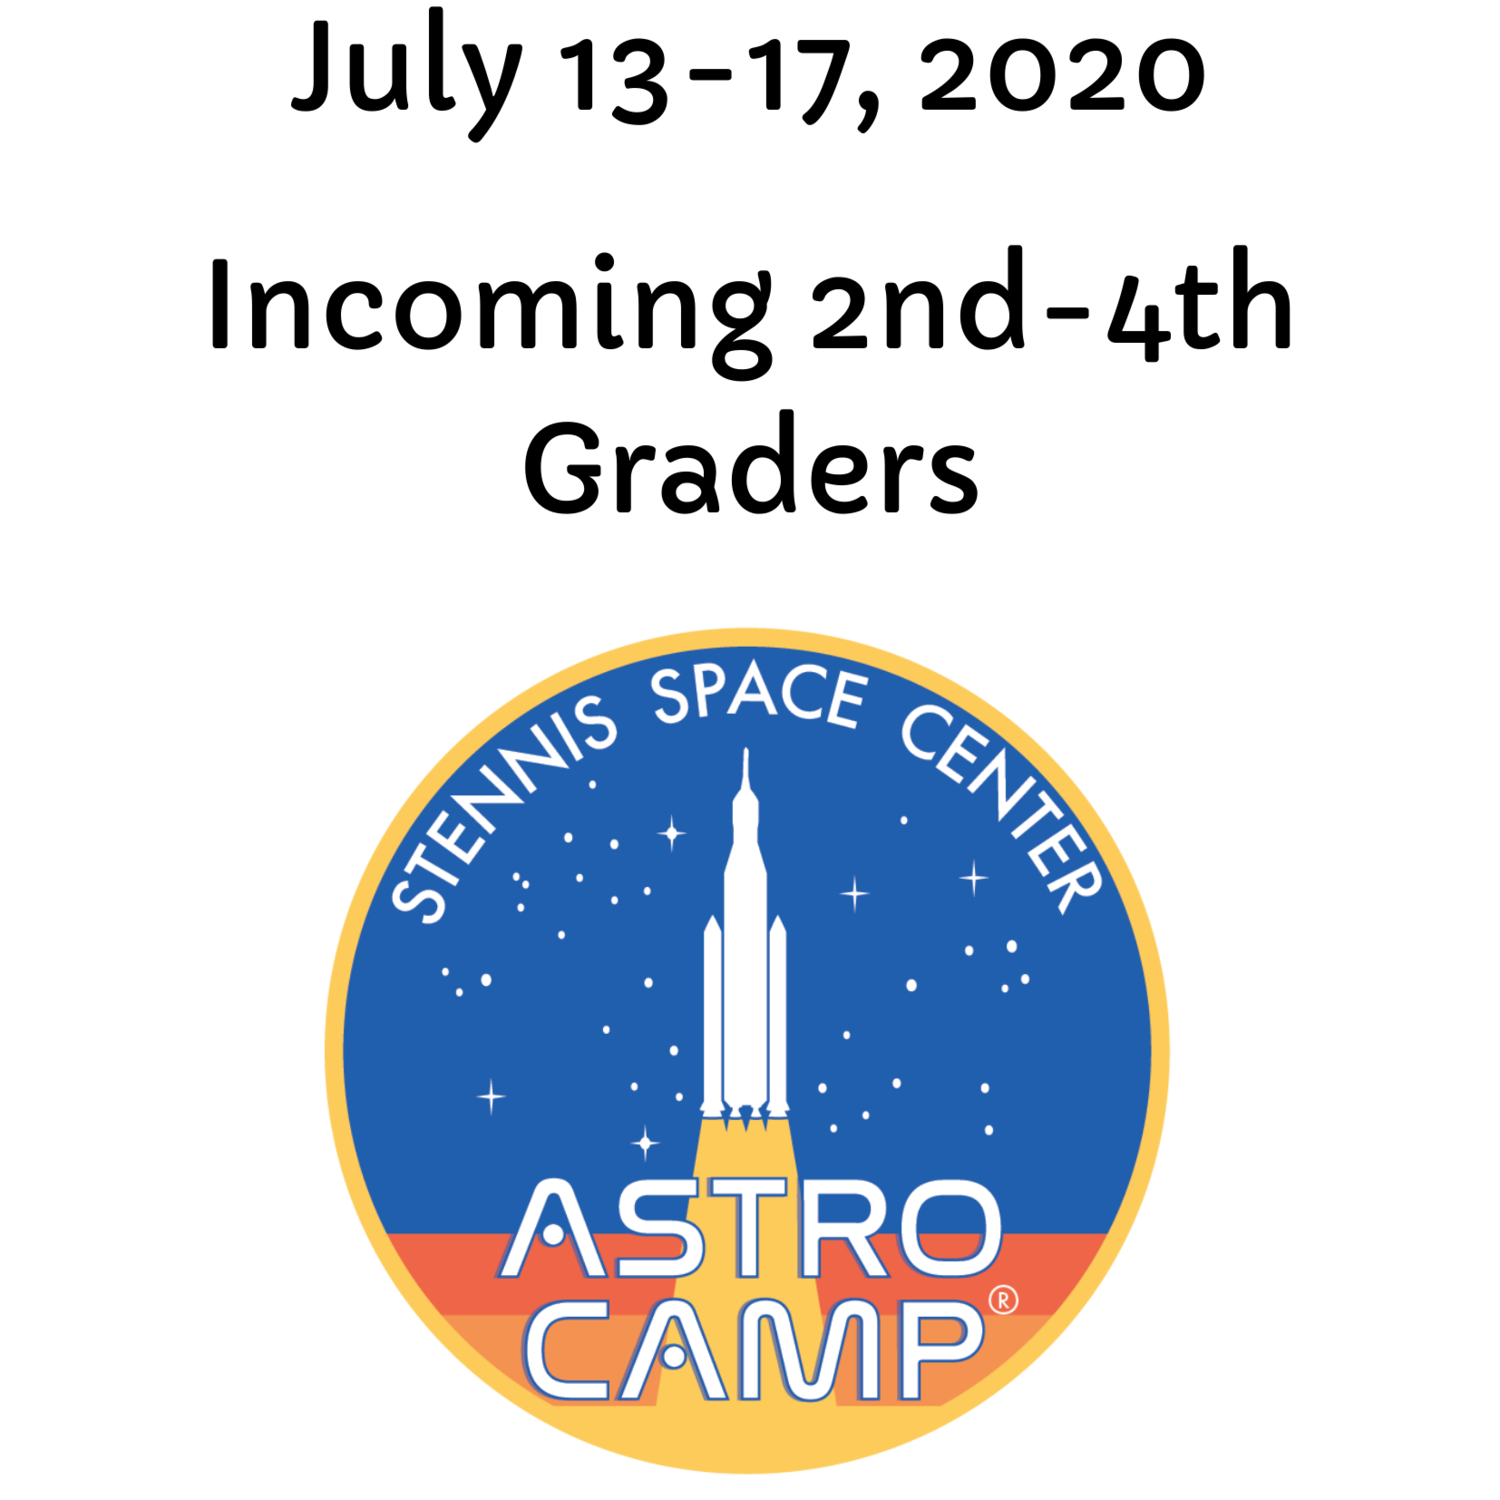 Pre-COVID - Astro Camp Registration July 13-17, 2020 (See Description Below for Important Information)